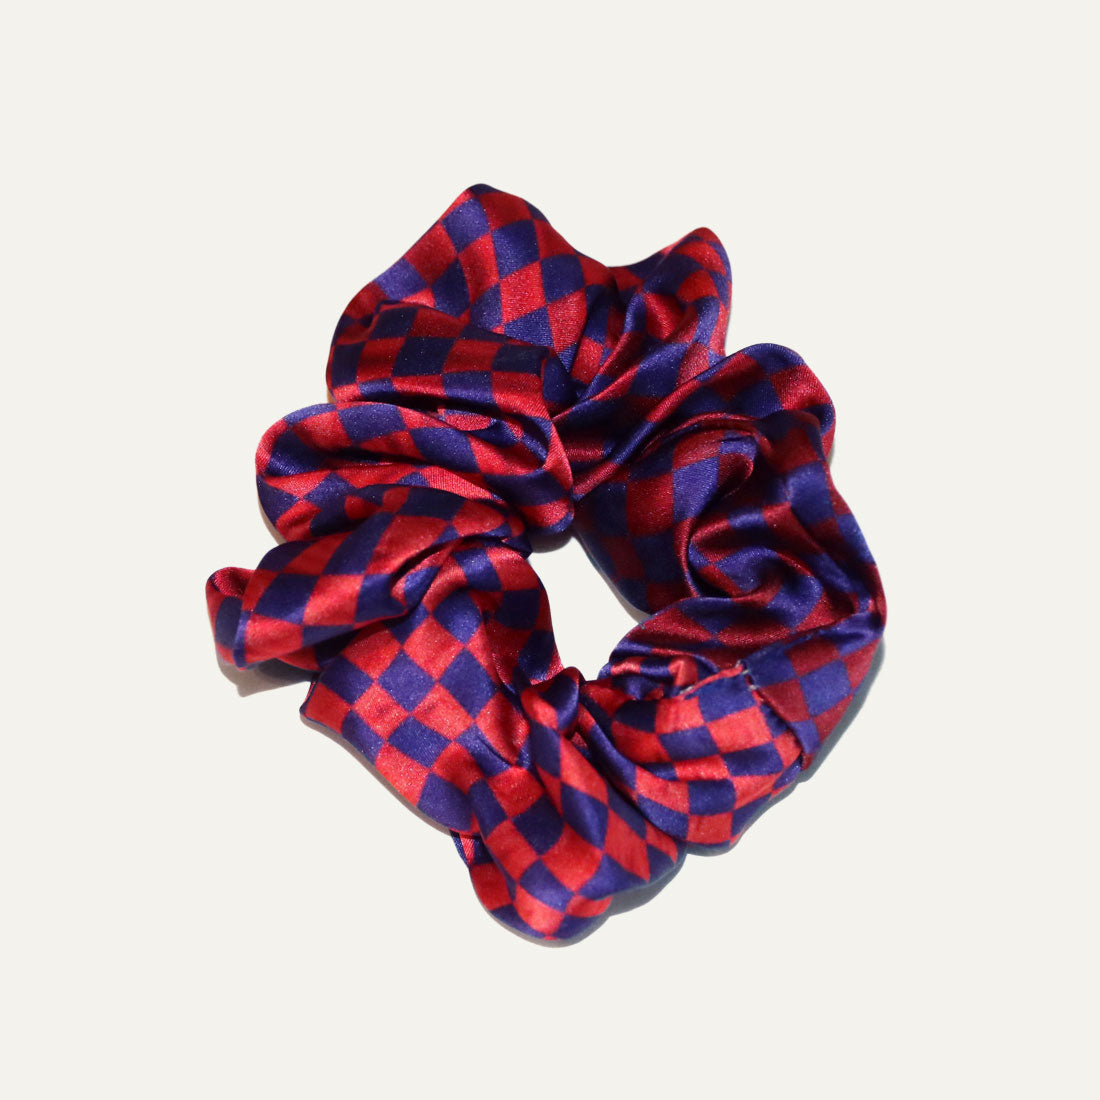 Buy Best Fashion Silk Scrunchies Online, in Paris, Tokyo, or Taipei; available for Selfridges, Le Bon Marché, Dover Street Market, Barneys New York, and Isetan.